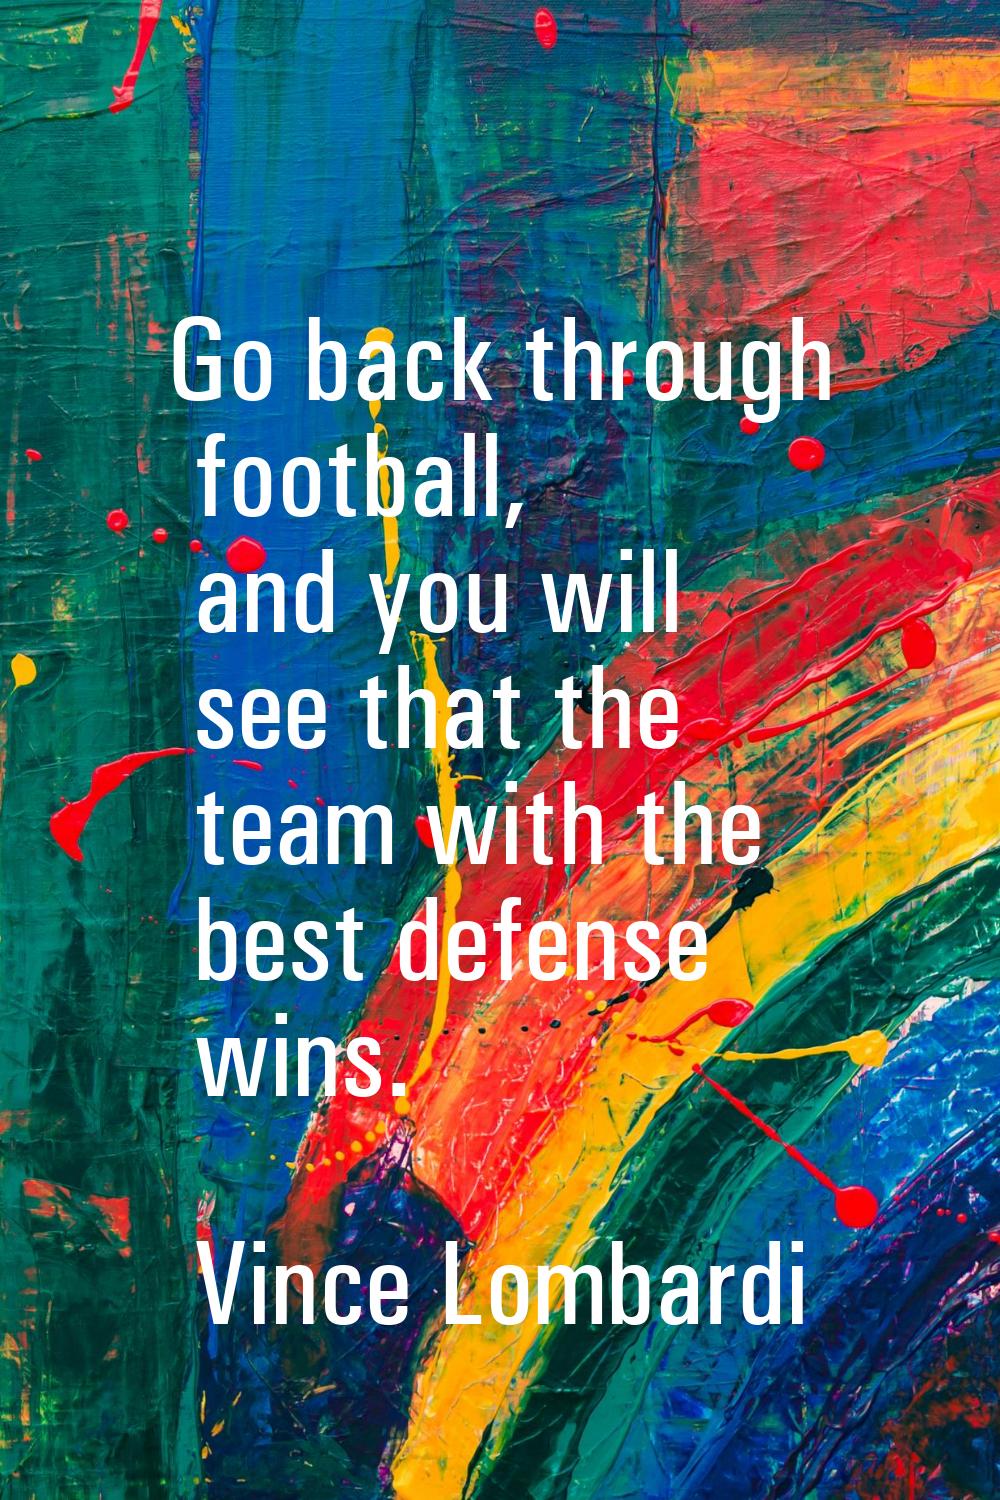 Go back through football, and you will see that the team with the best defense wins.